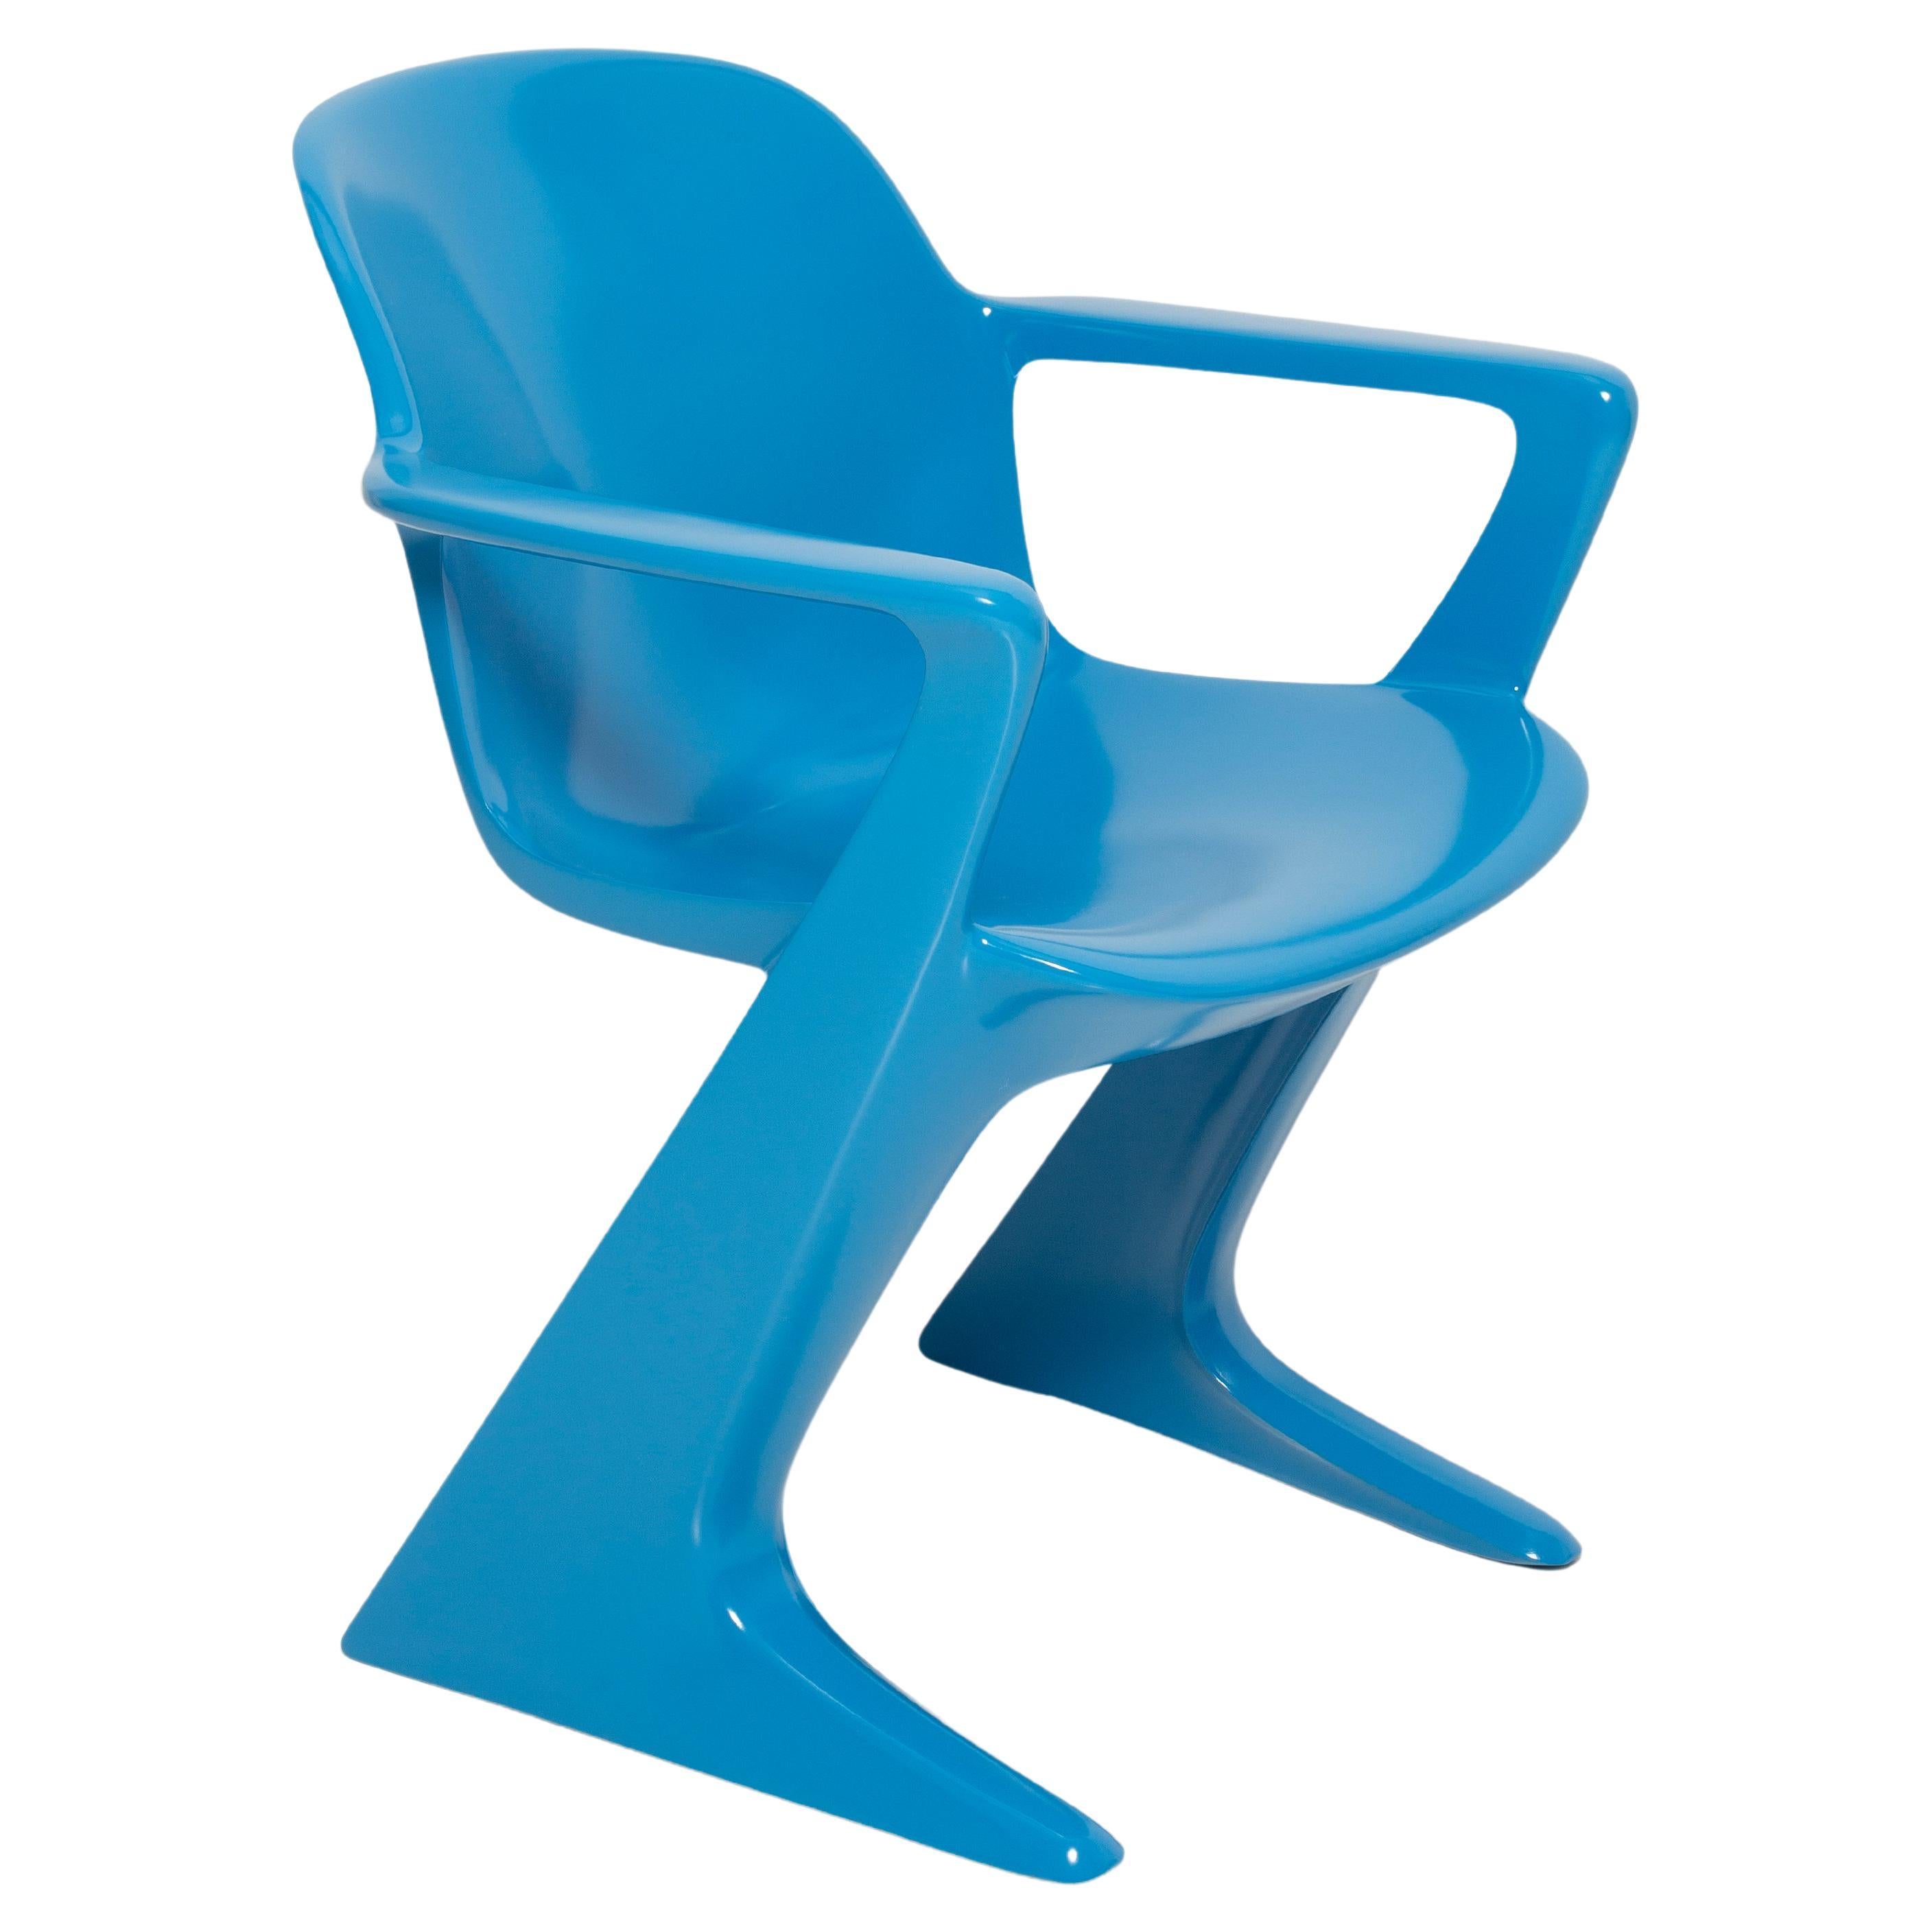 Blue Kangaroo Chair Designed by Ernst Moeckl, Germany, 1968 For Sale